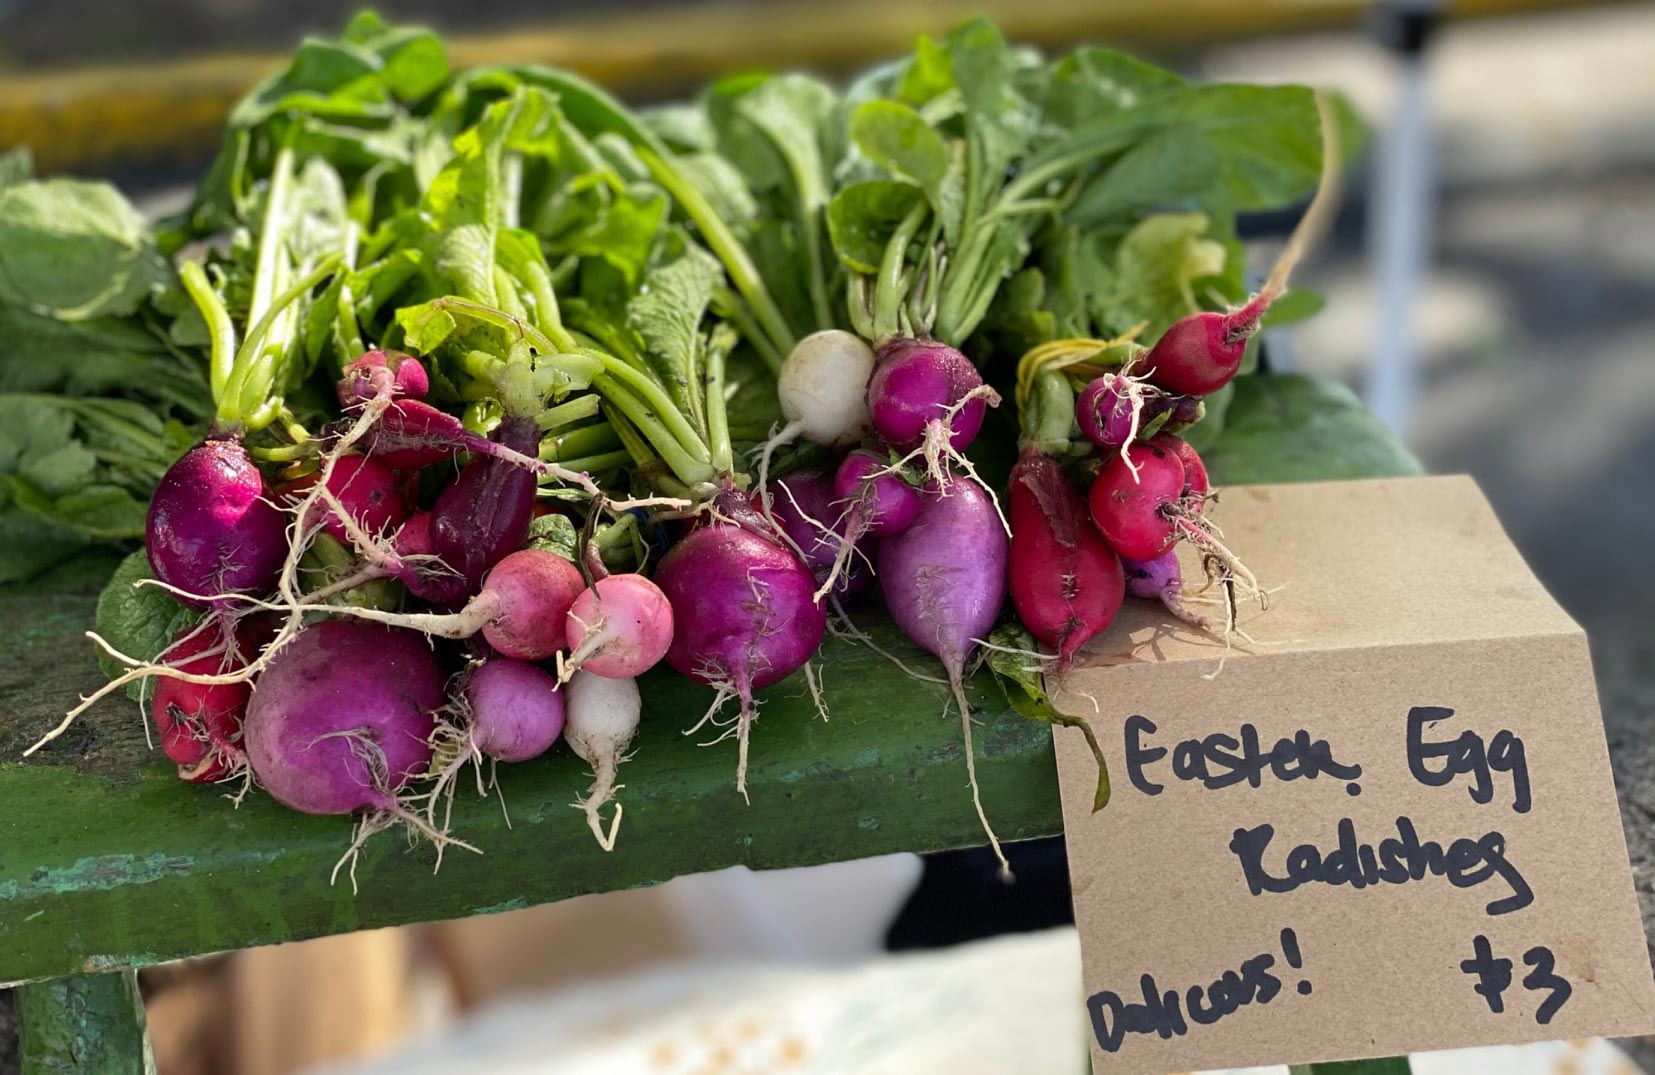 Easter egg radishes at Winter Haven Farmers Market